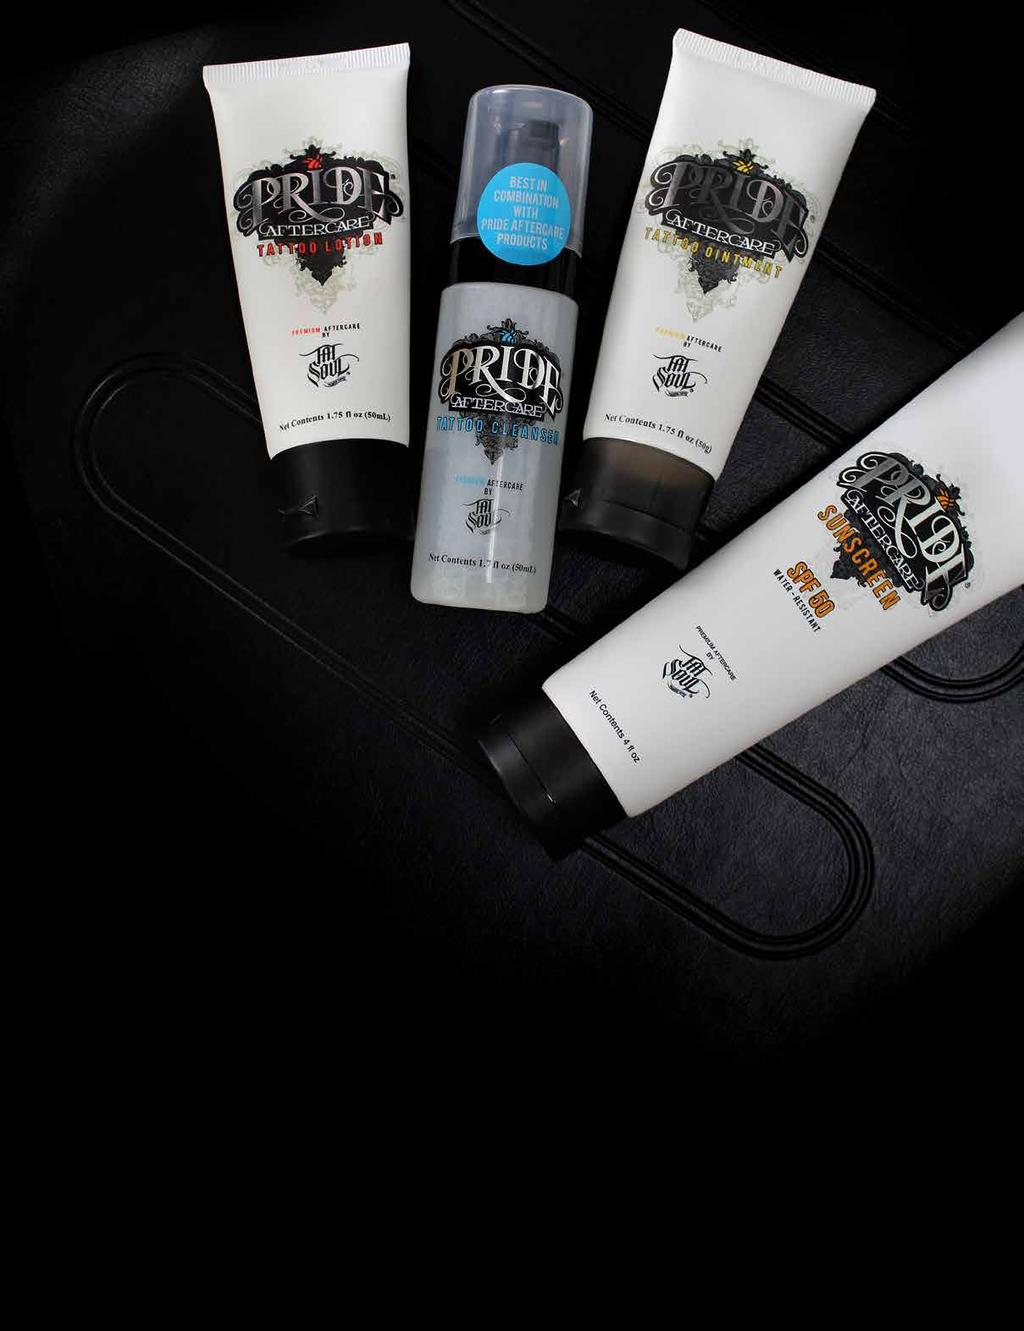 B C TATTOO AFTERCARE A D REDEMPTION FEATURES: USDA Certified 100% Natural For use during and after a tattoo Petroleum free.25 oz $5.00 1 oz $7.99 6 oz $19.